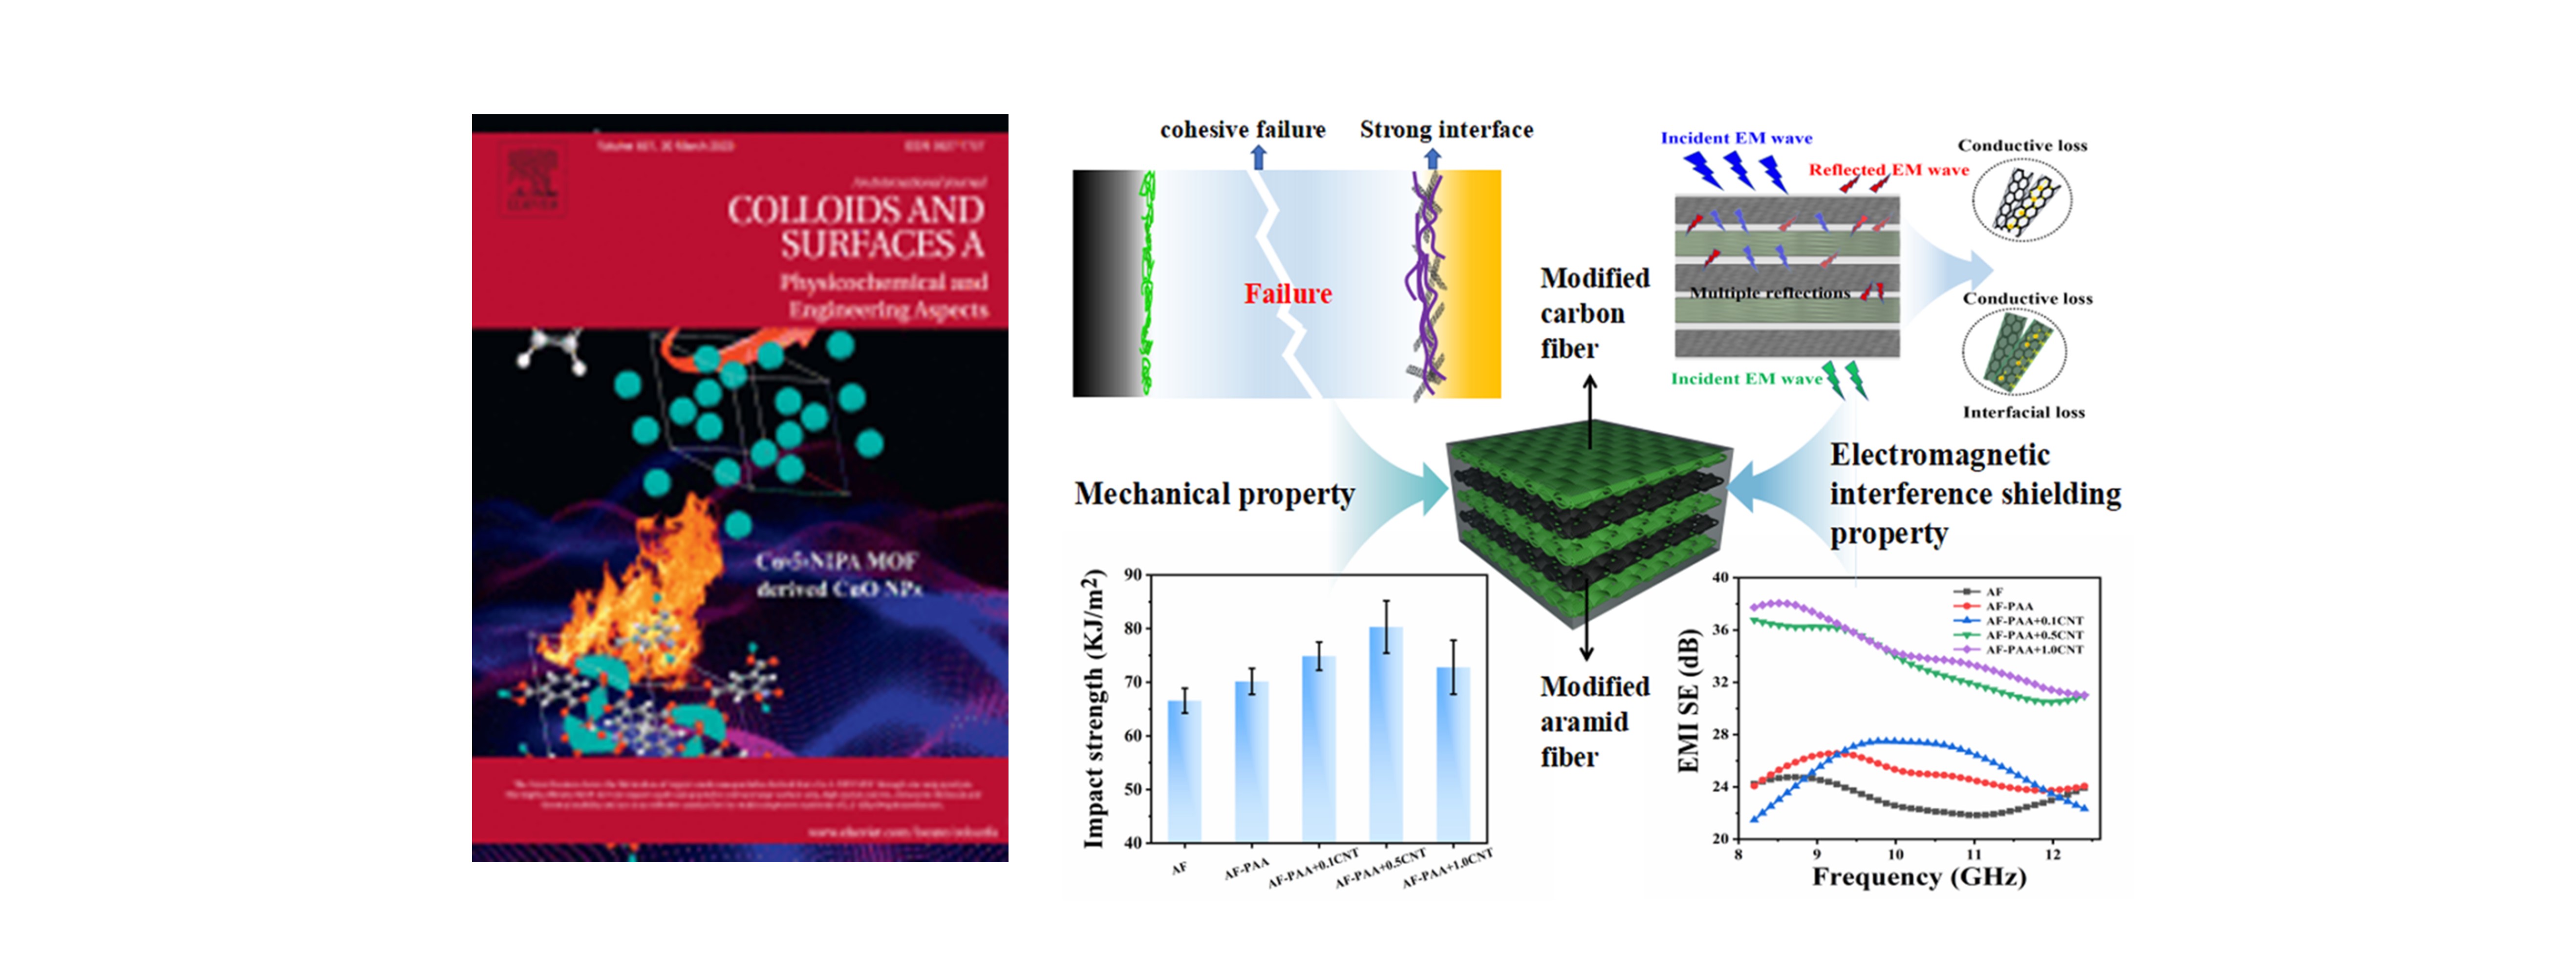 Enhanced mechanical and electromagnetic interference shielding performance of carbon fiber/epoxy composite with intercalation of modified aramid fiber